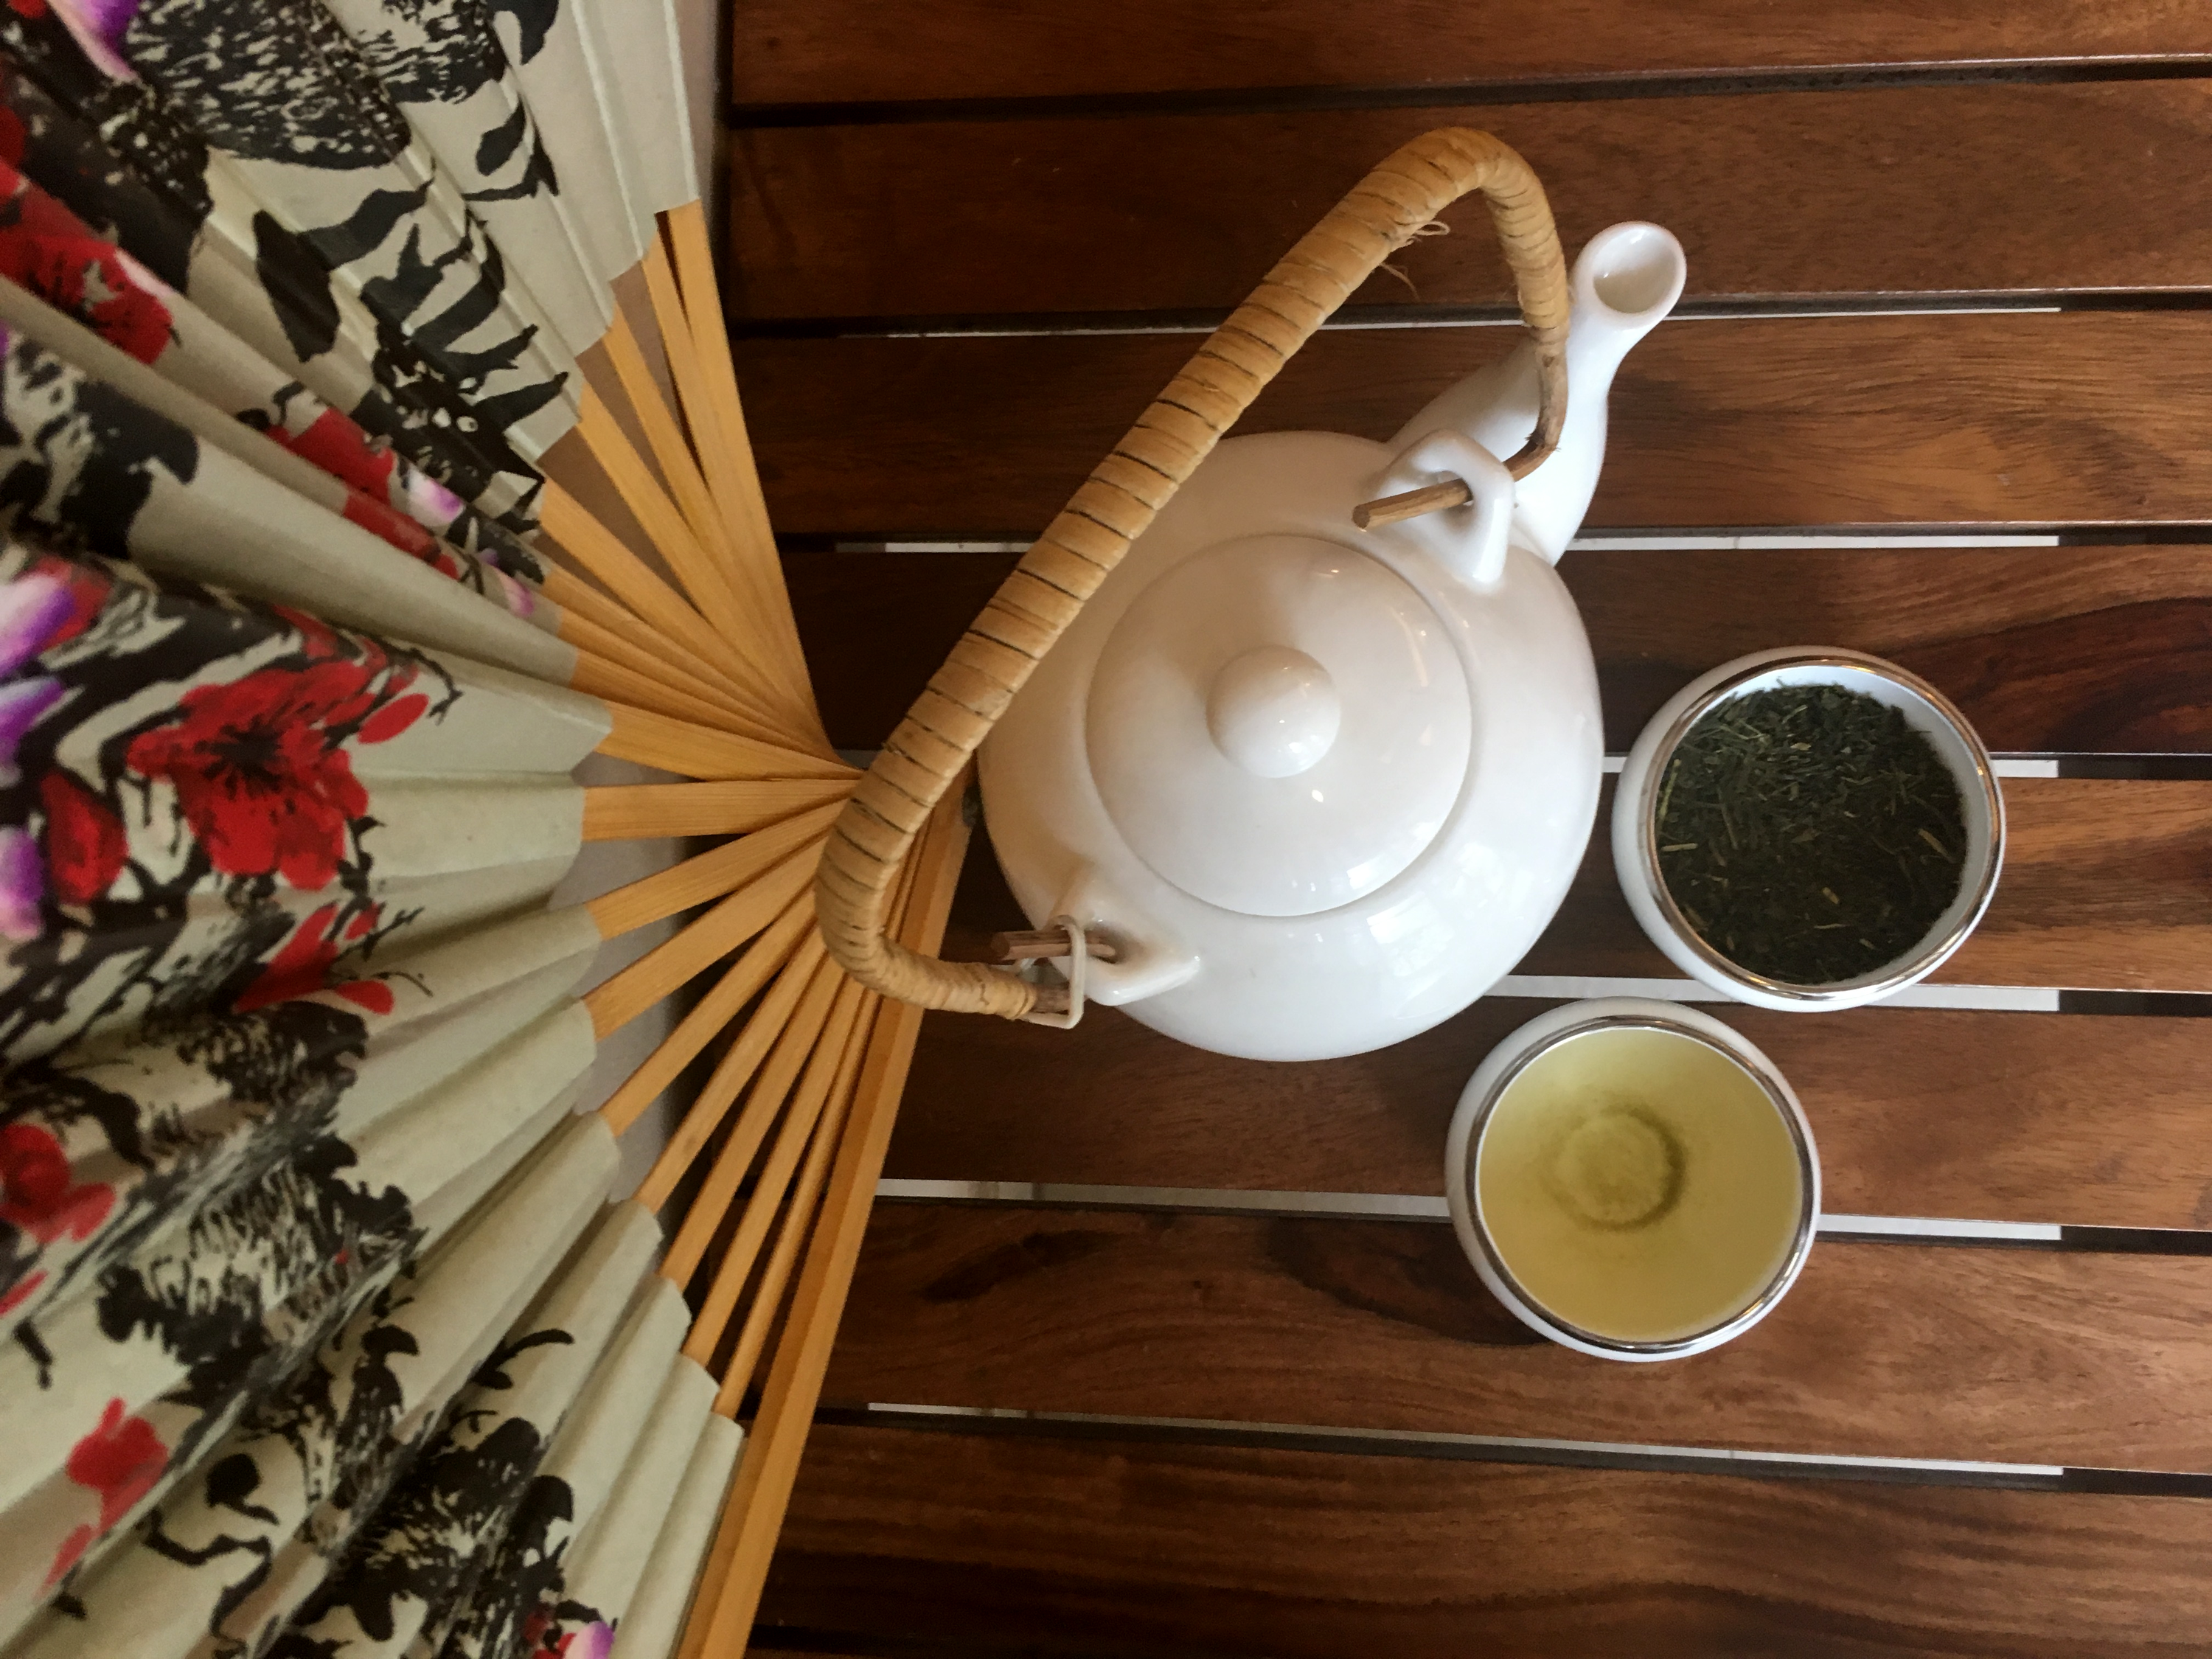 Green tea Ritual is a Japanese tradition to aesthetically enjoy relaxation, peace, calm & simply a sense of being in the company of dear one. An Oriental staple, green tea holds a ceremonial relevance & offers a host of beauty & health benefits.